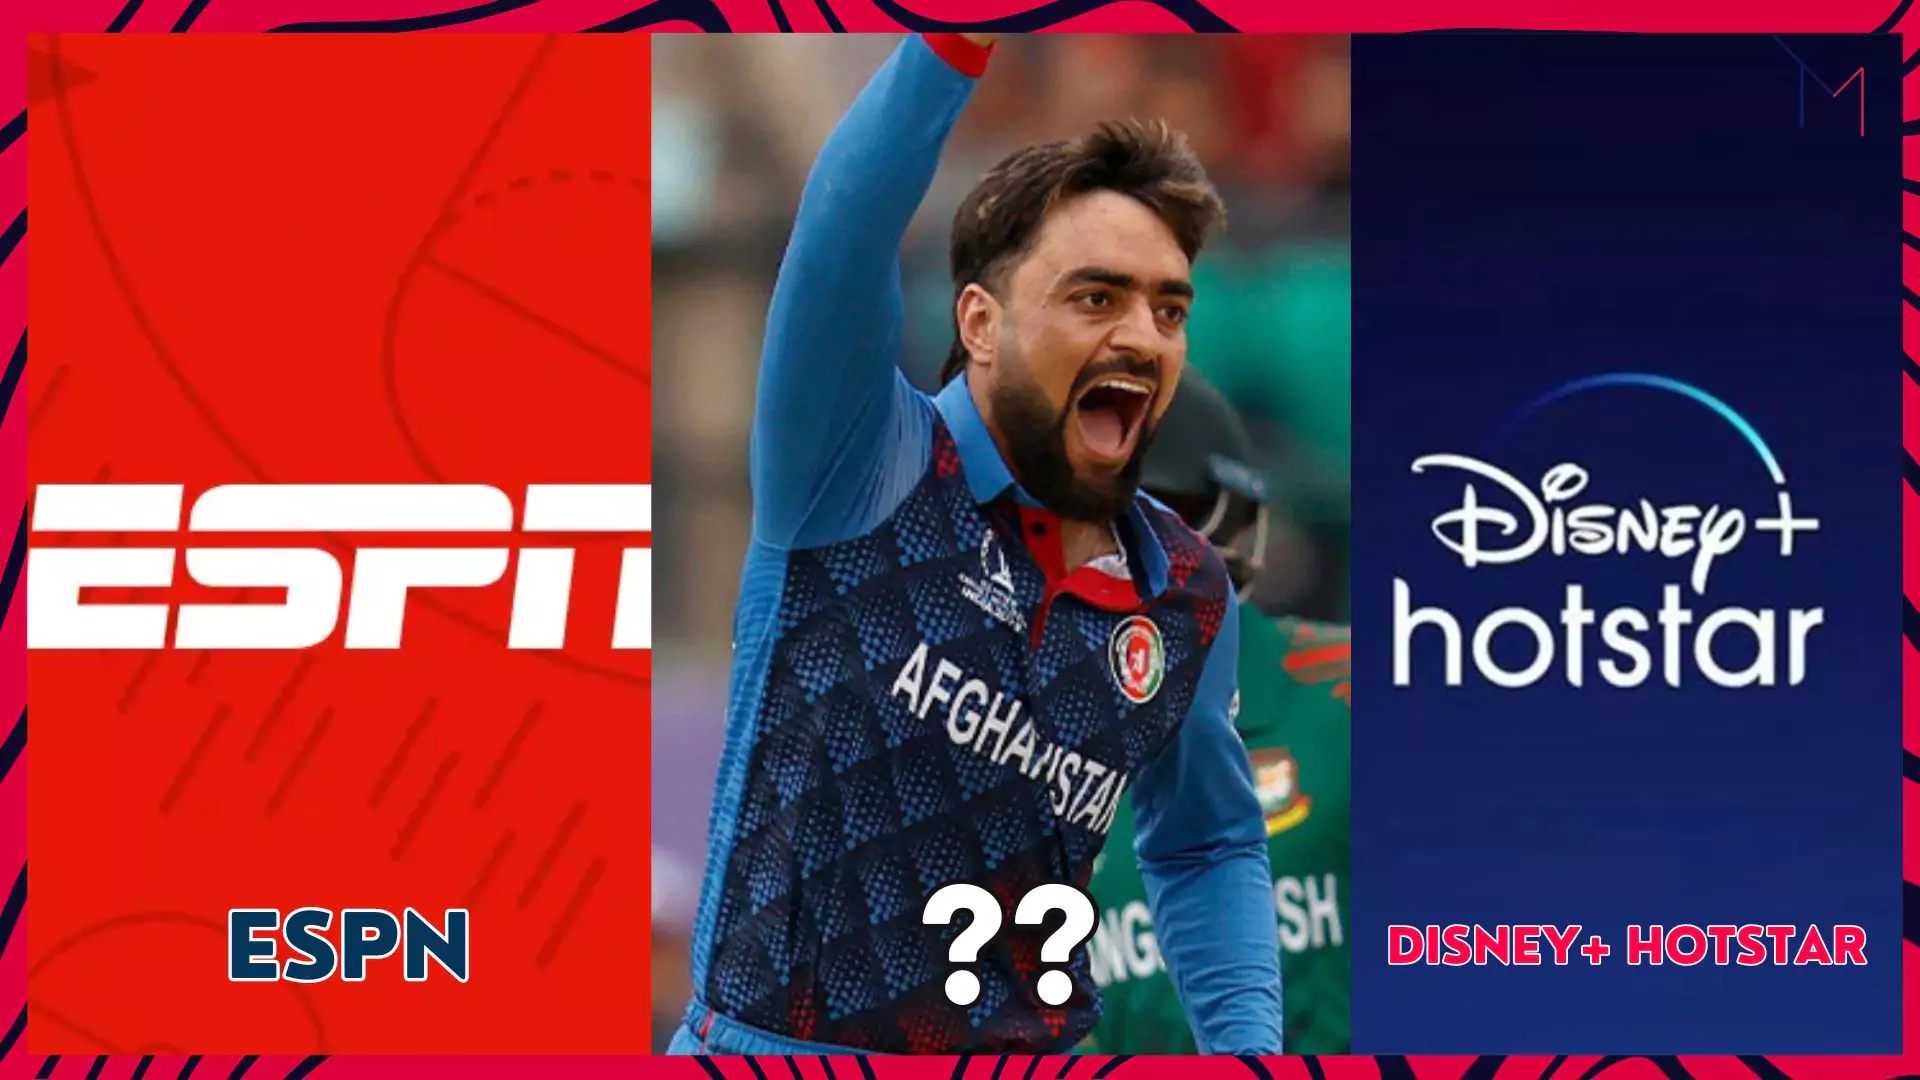 How to watch the Cricket World Cup in The Bahamas